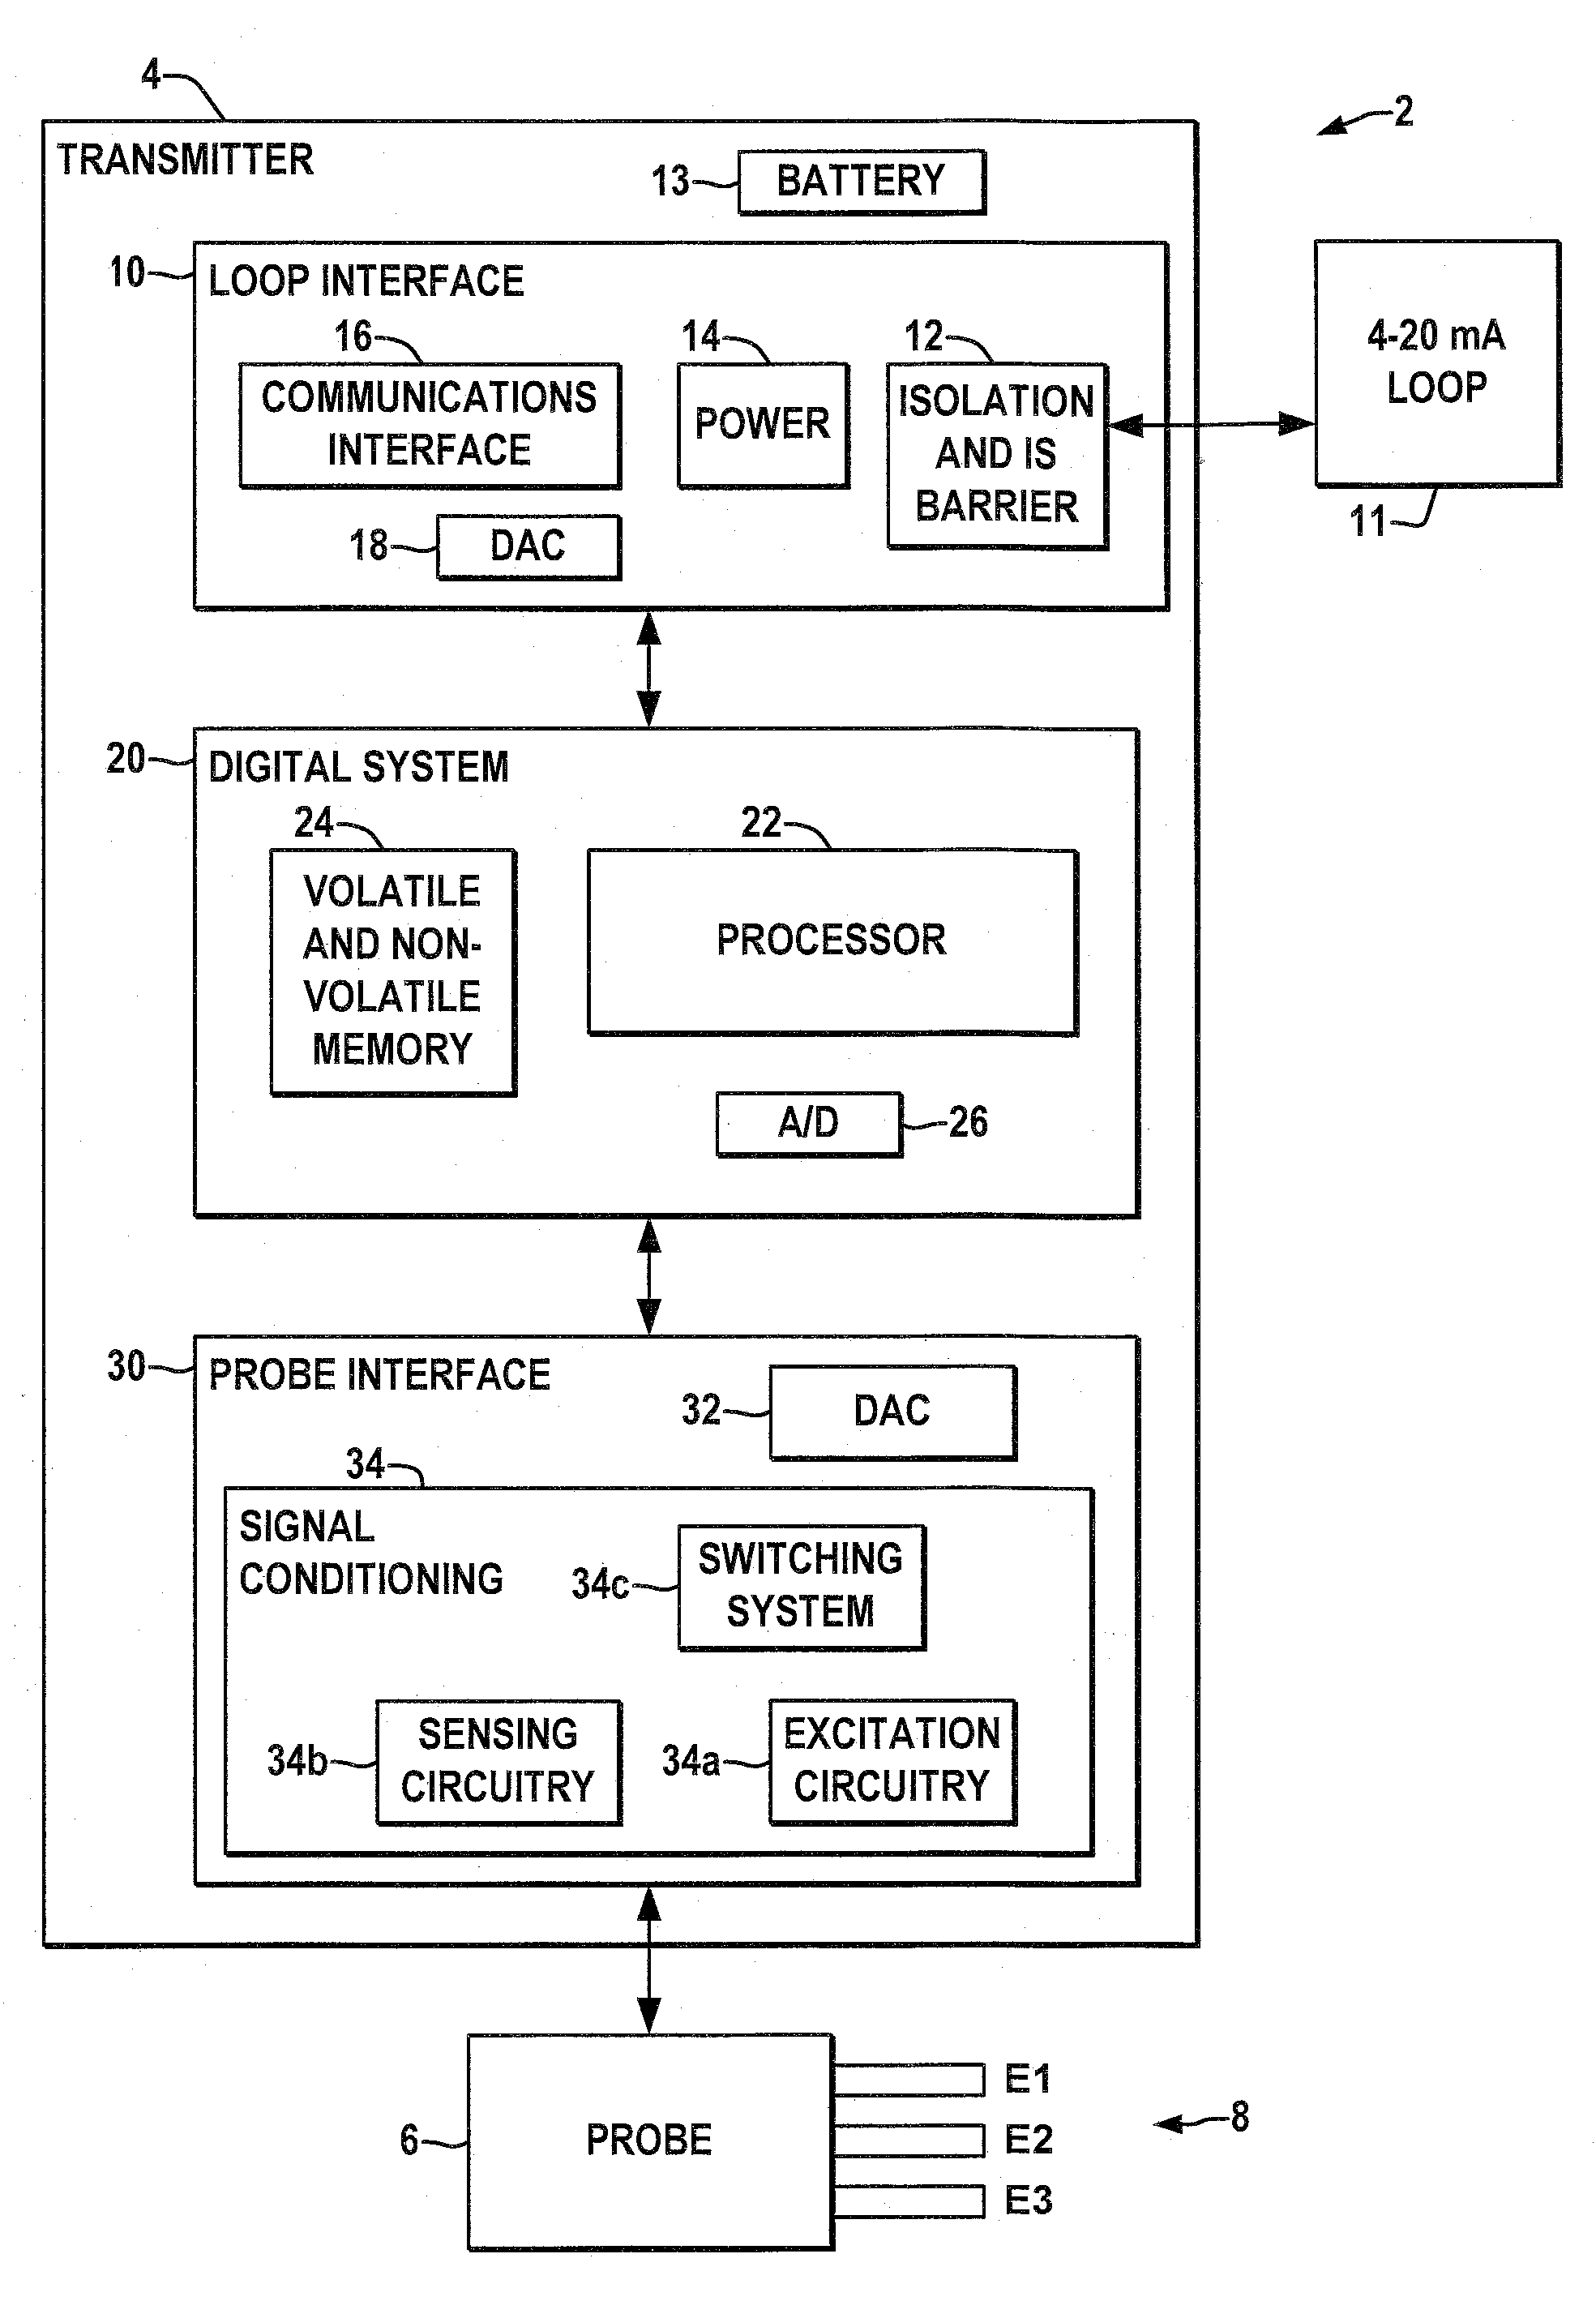 Self-calibrating corrosion measurement field device with improved signal measurement and excitation circuitry